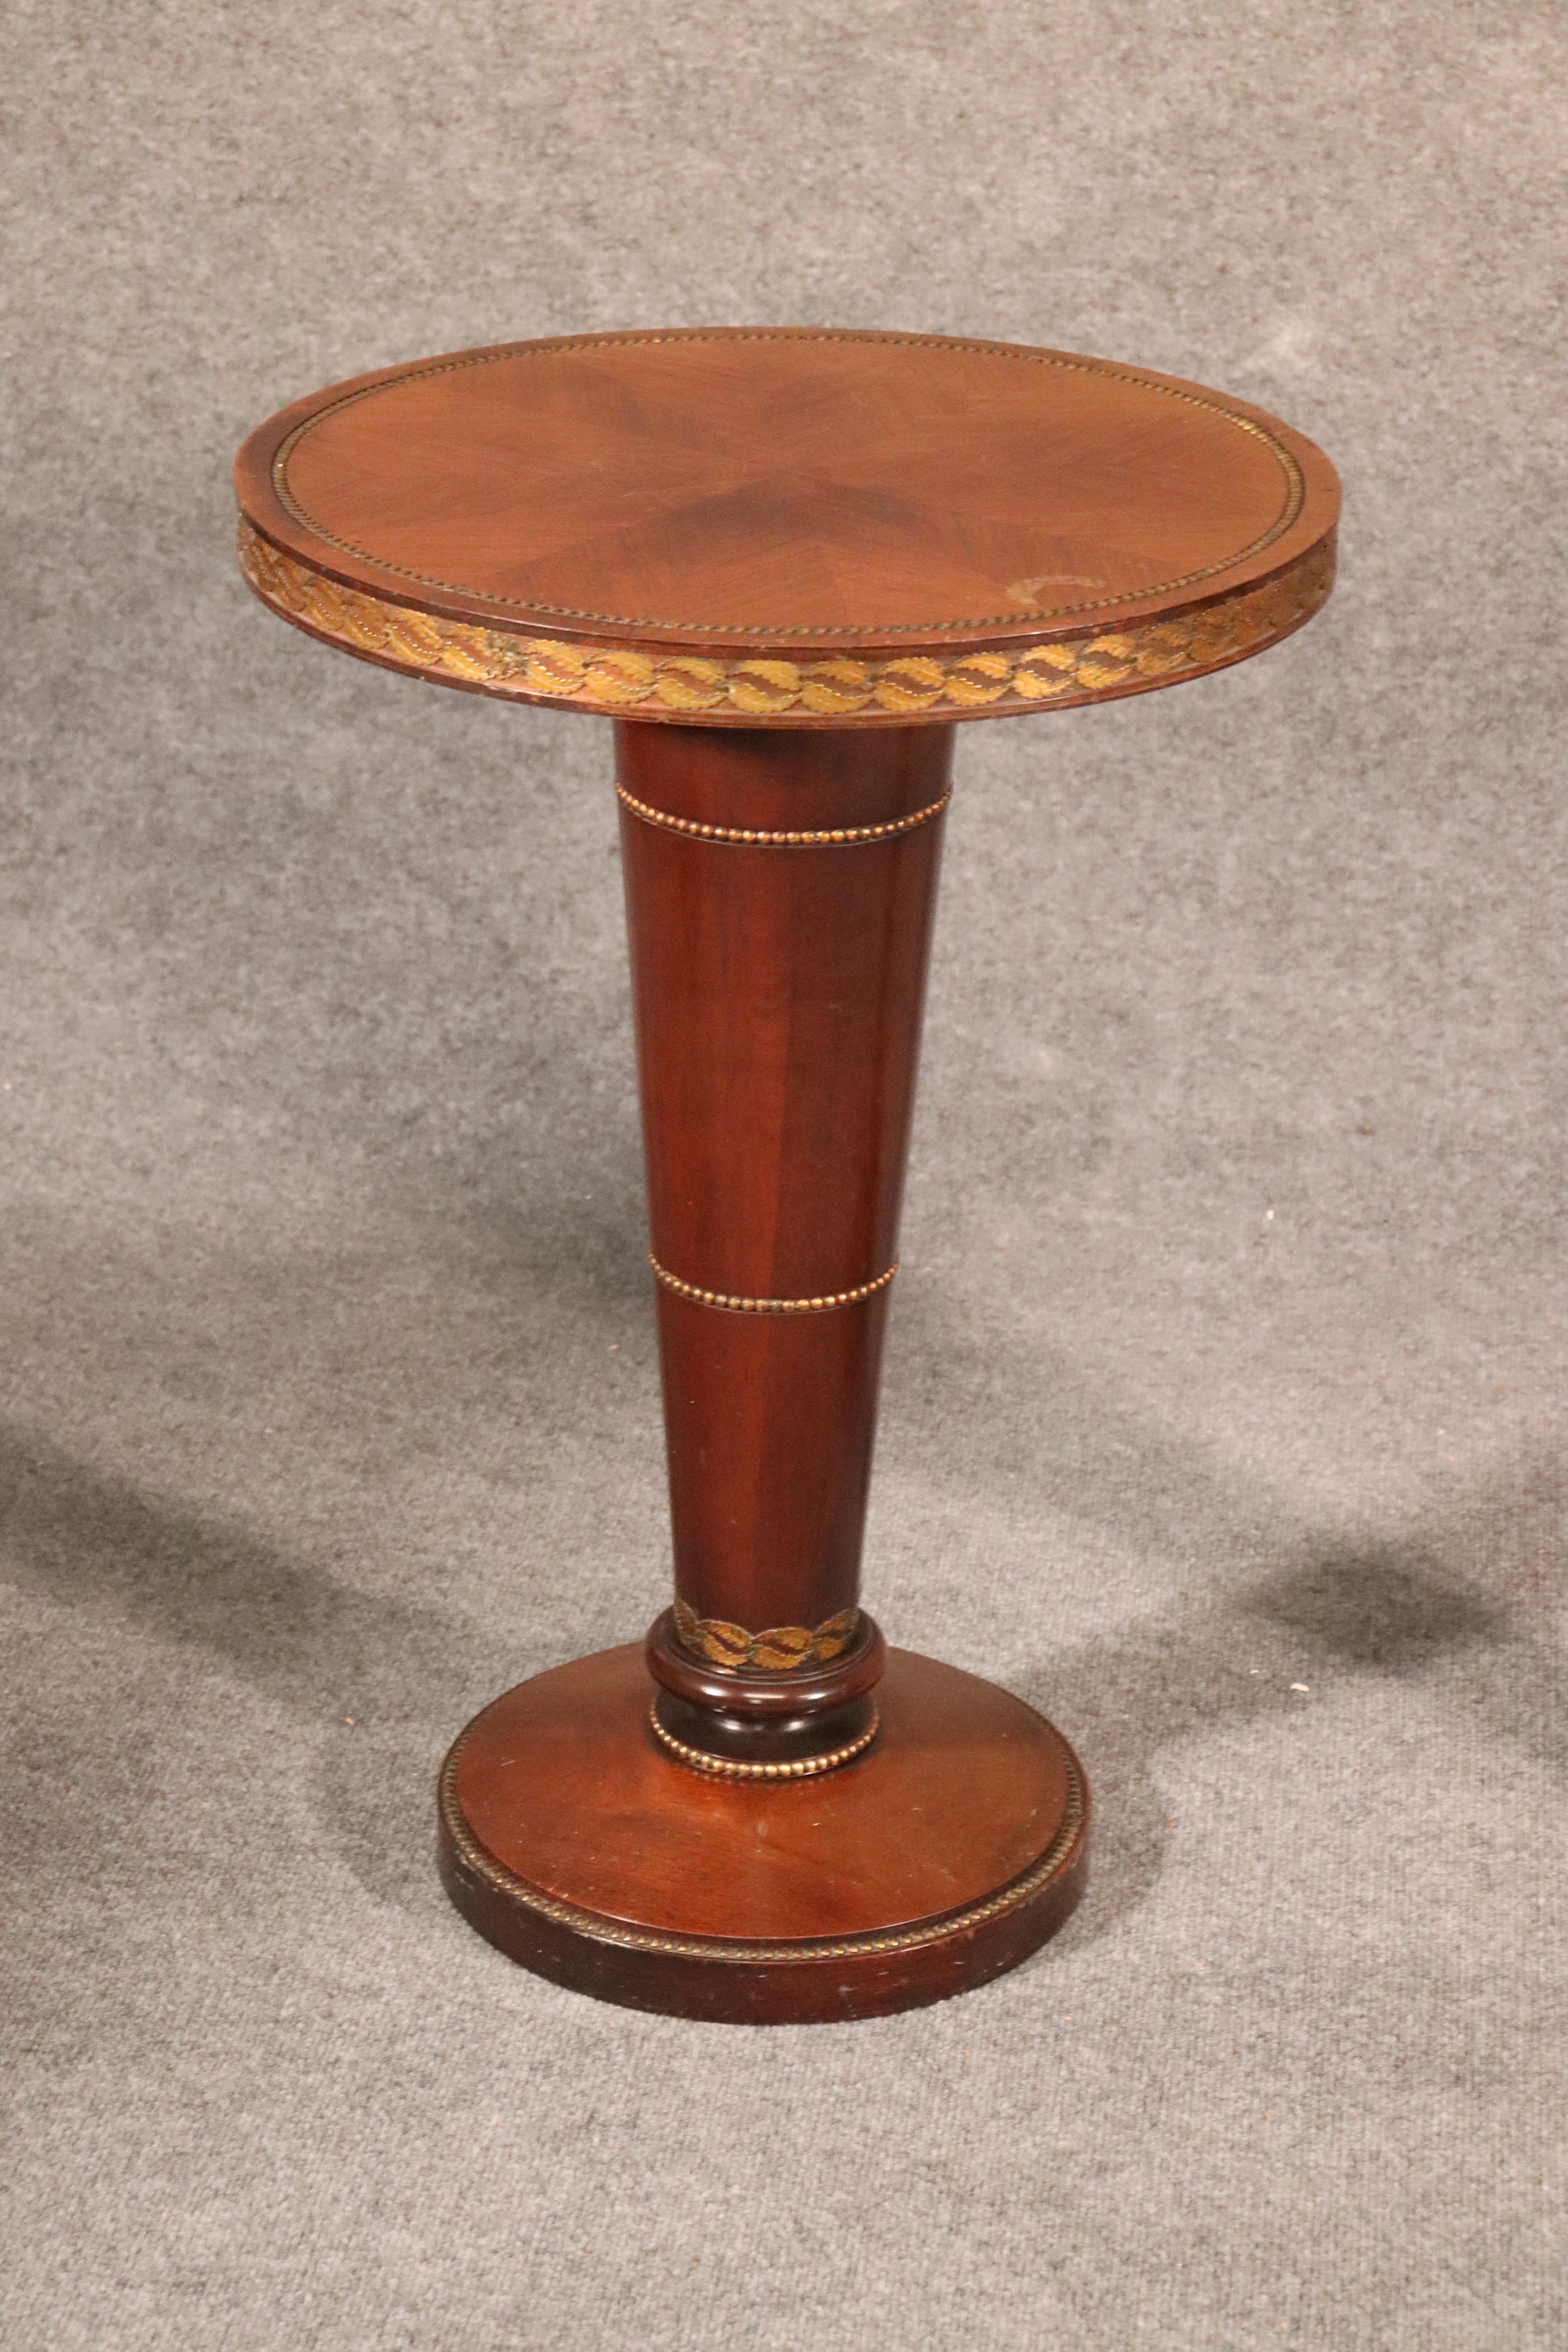 These tables are quite unique and well-designed most likely by the famous Grosfeld House of New York in the 1950s. Featuring solid bronze ormolu surrounding the base and the top and fine mahogany these tables are in good original condition and can